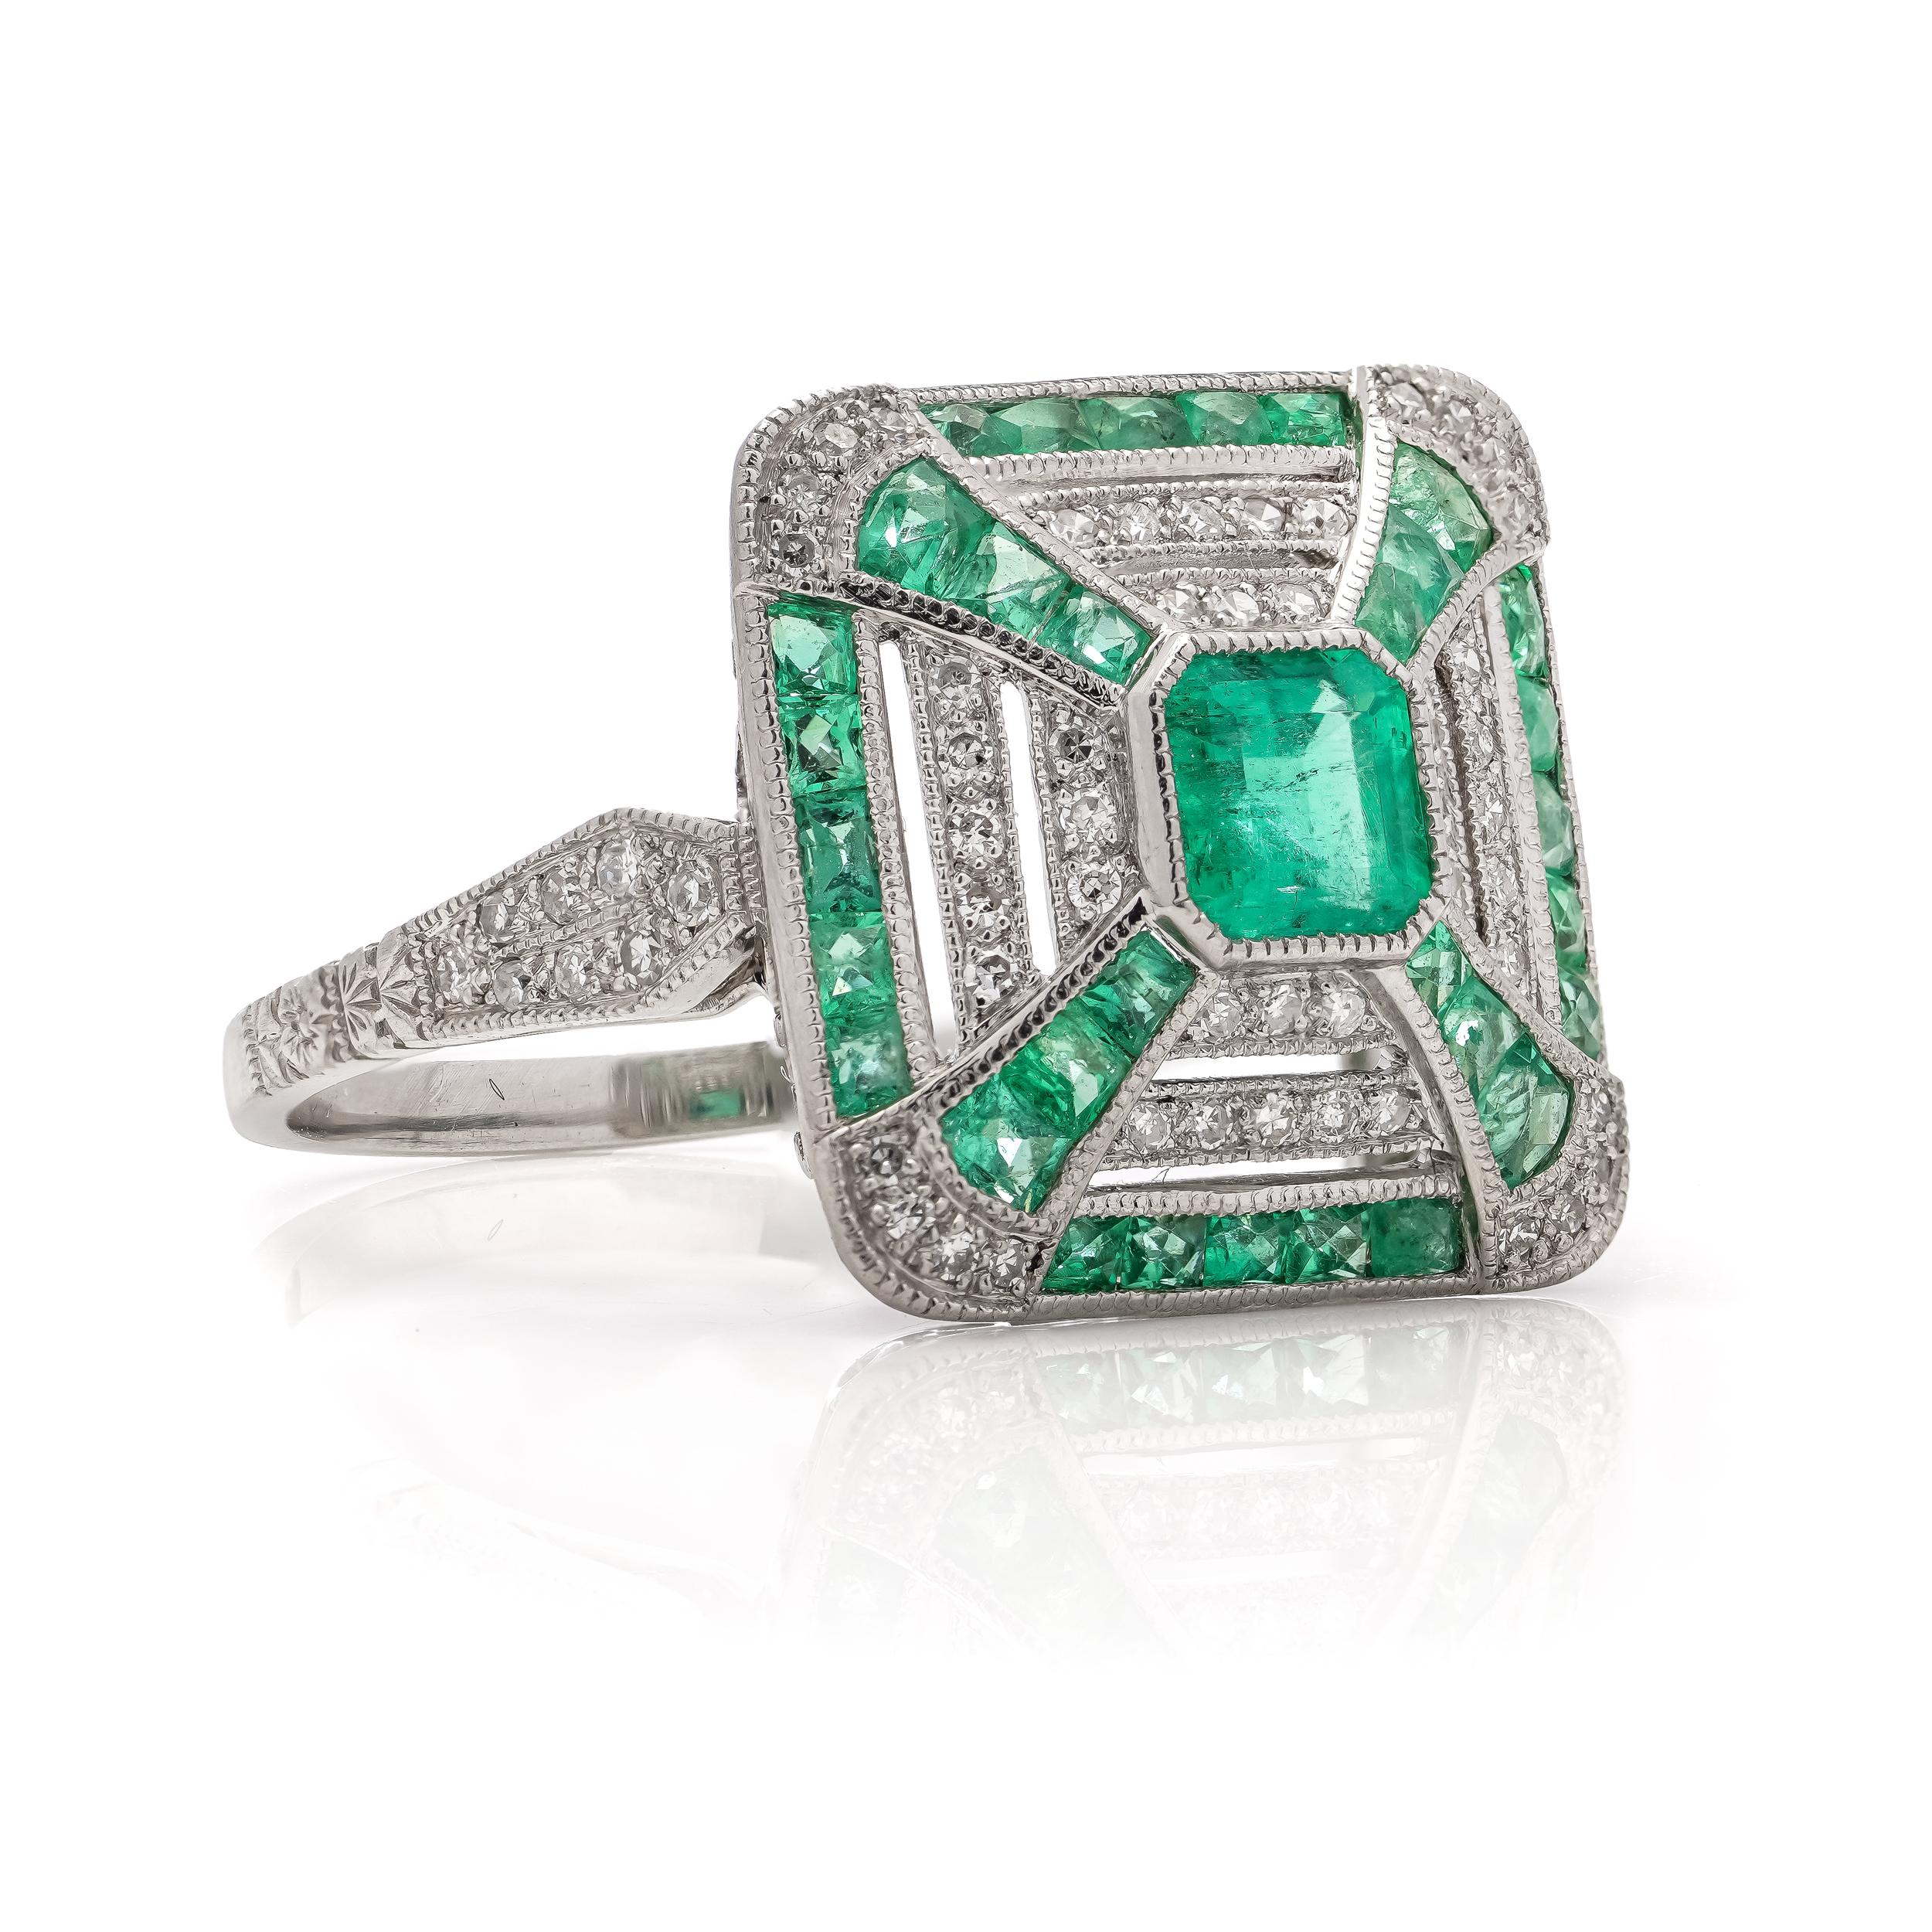 Platinum Art Deco-inspired 0.42 carats of Emerald fashion ring For Sale 4